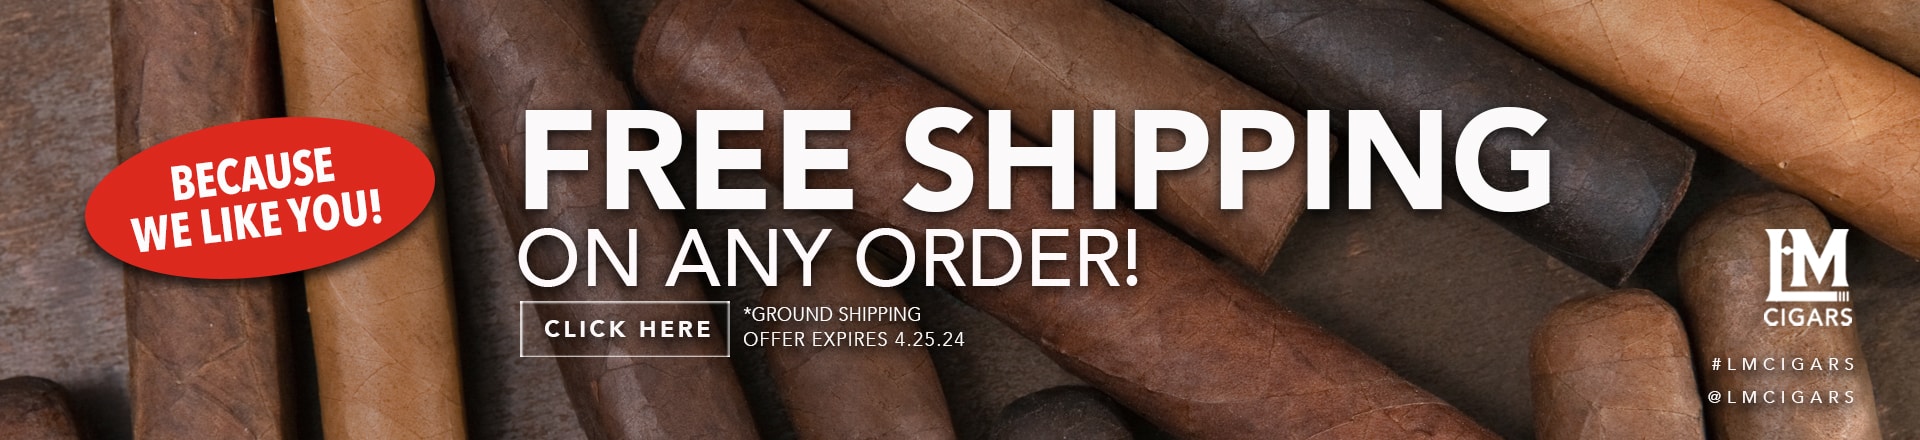 free shipping sitewide on lmcigars.com